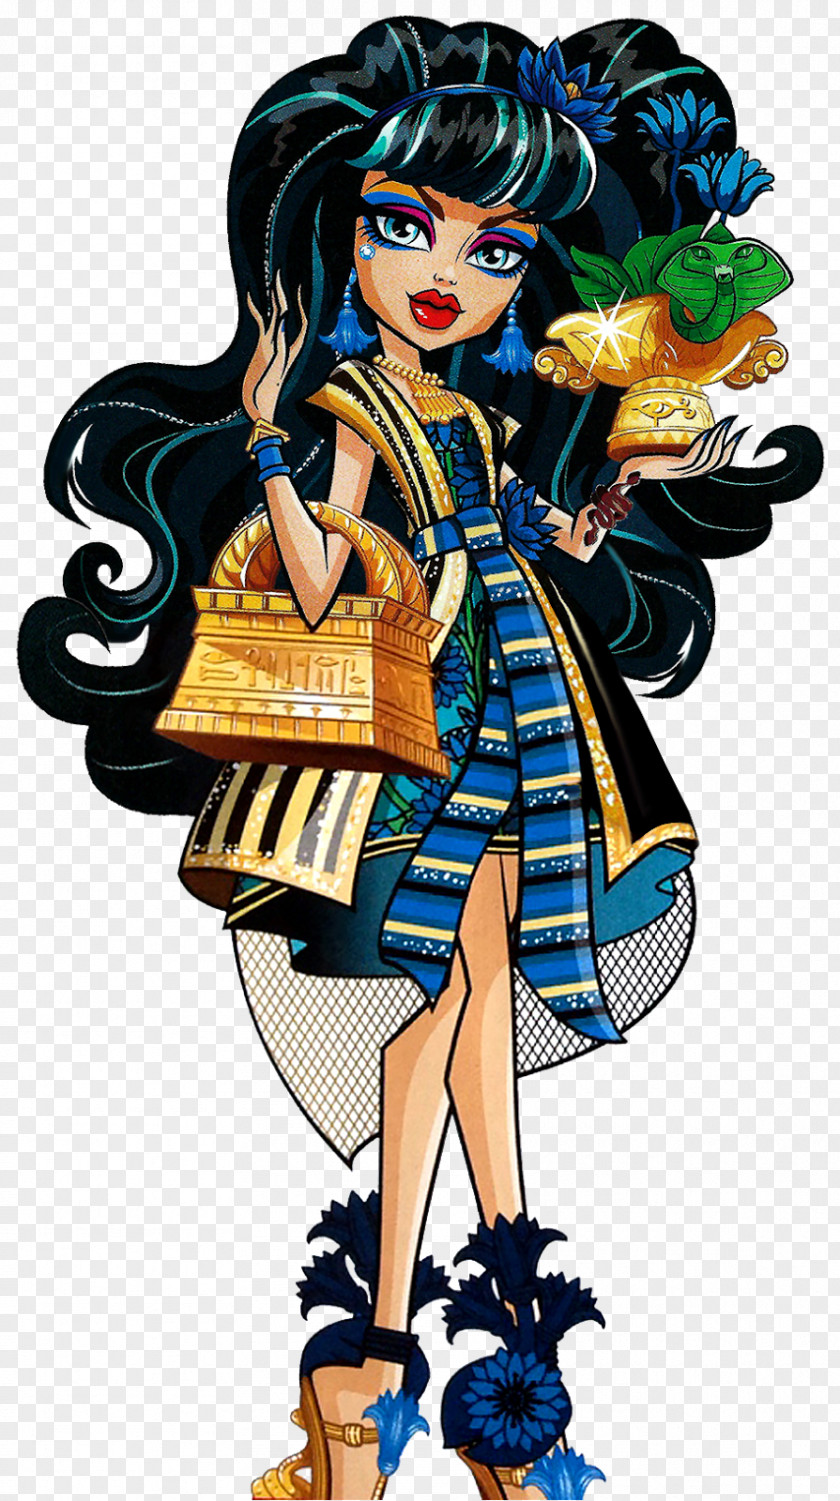 Doll Monster High Cleo De Nile Toy Barbie PNG